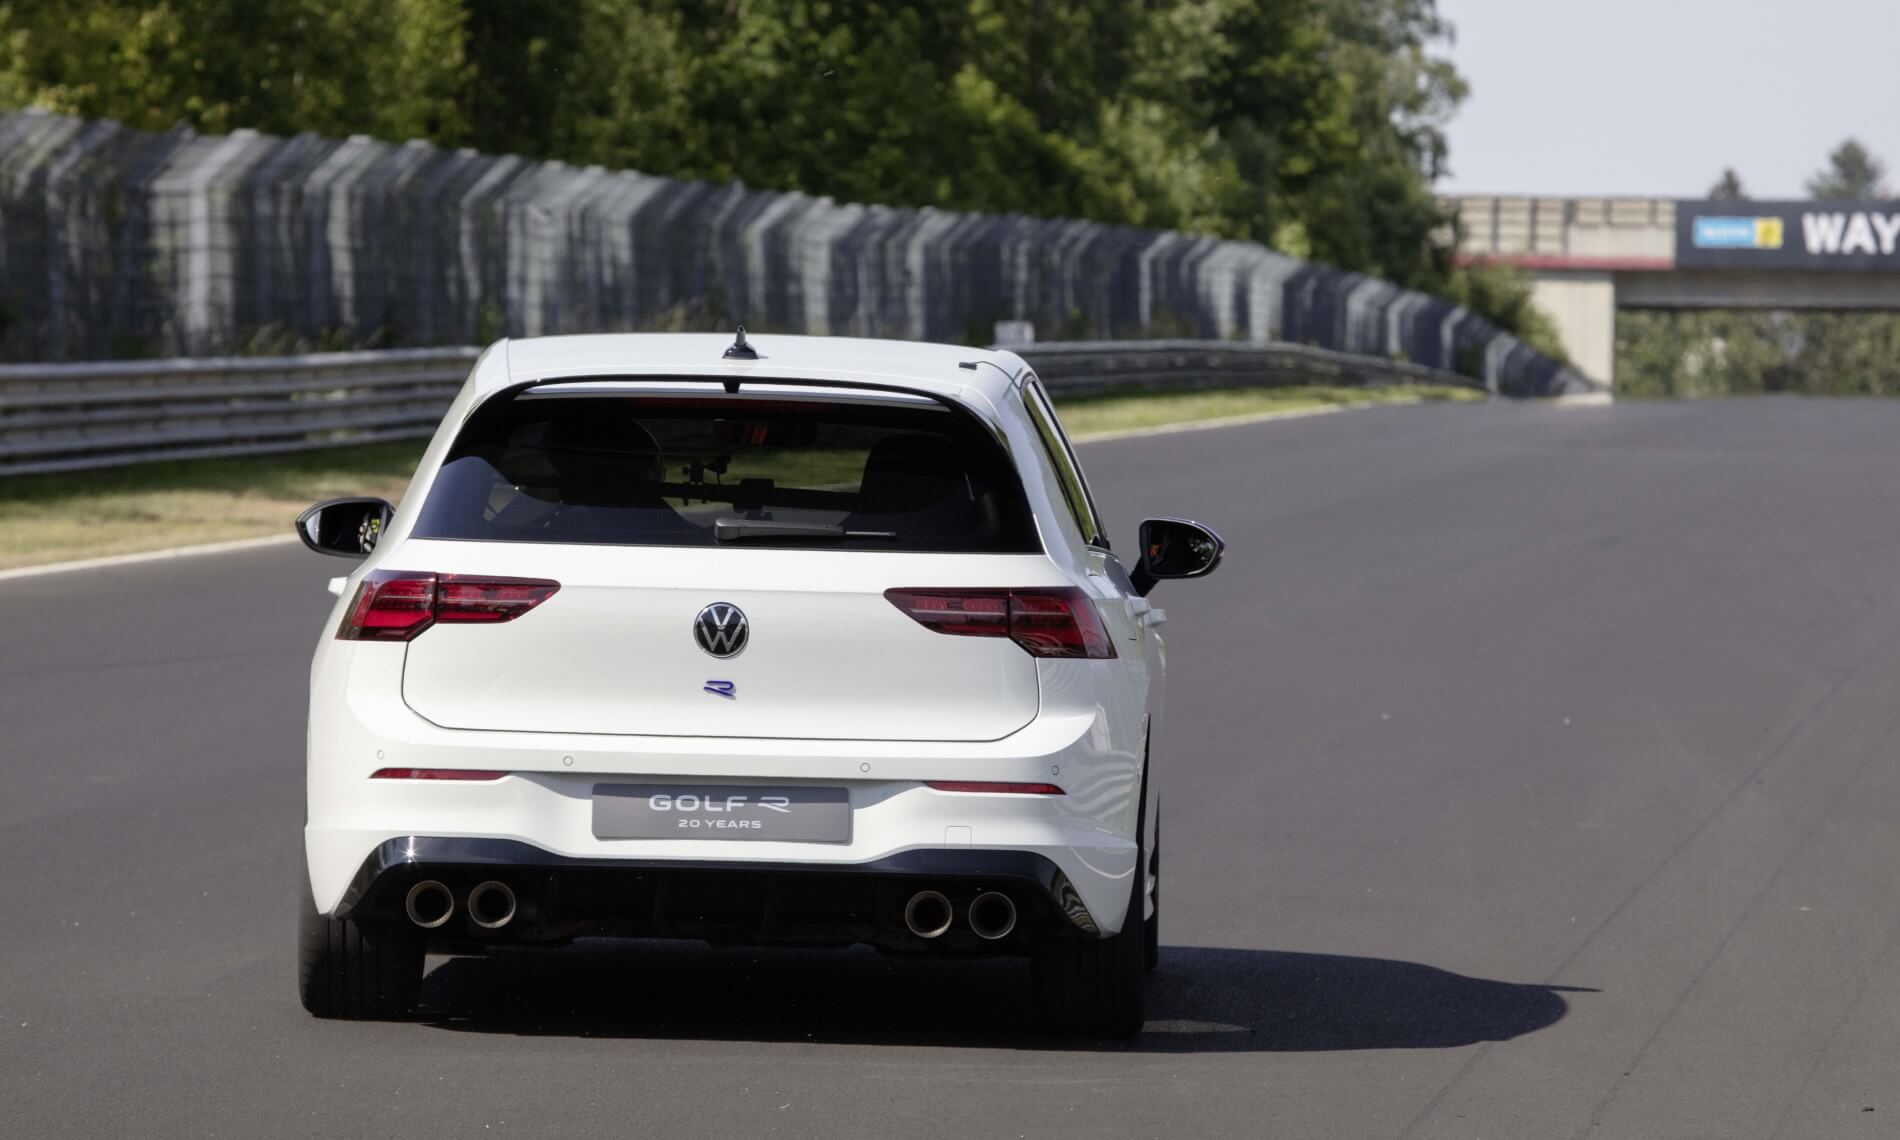 The Golf R “20 Years” is the fastest Volkswagen R ever on the